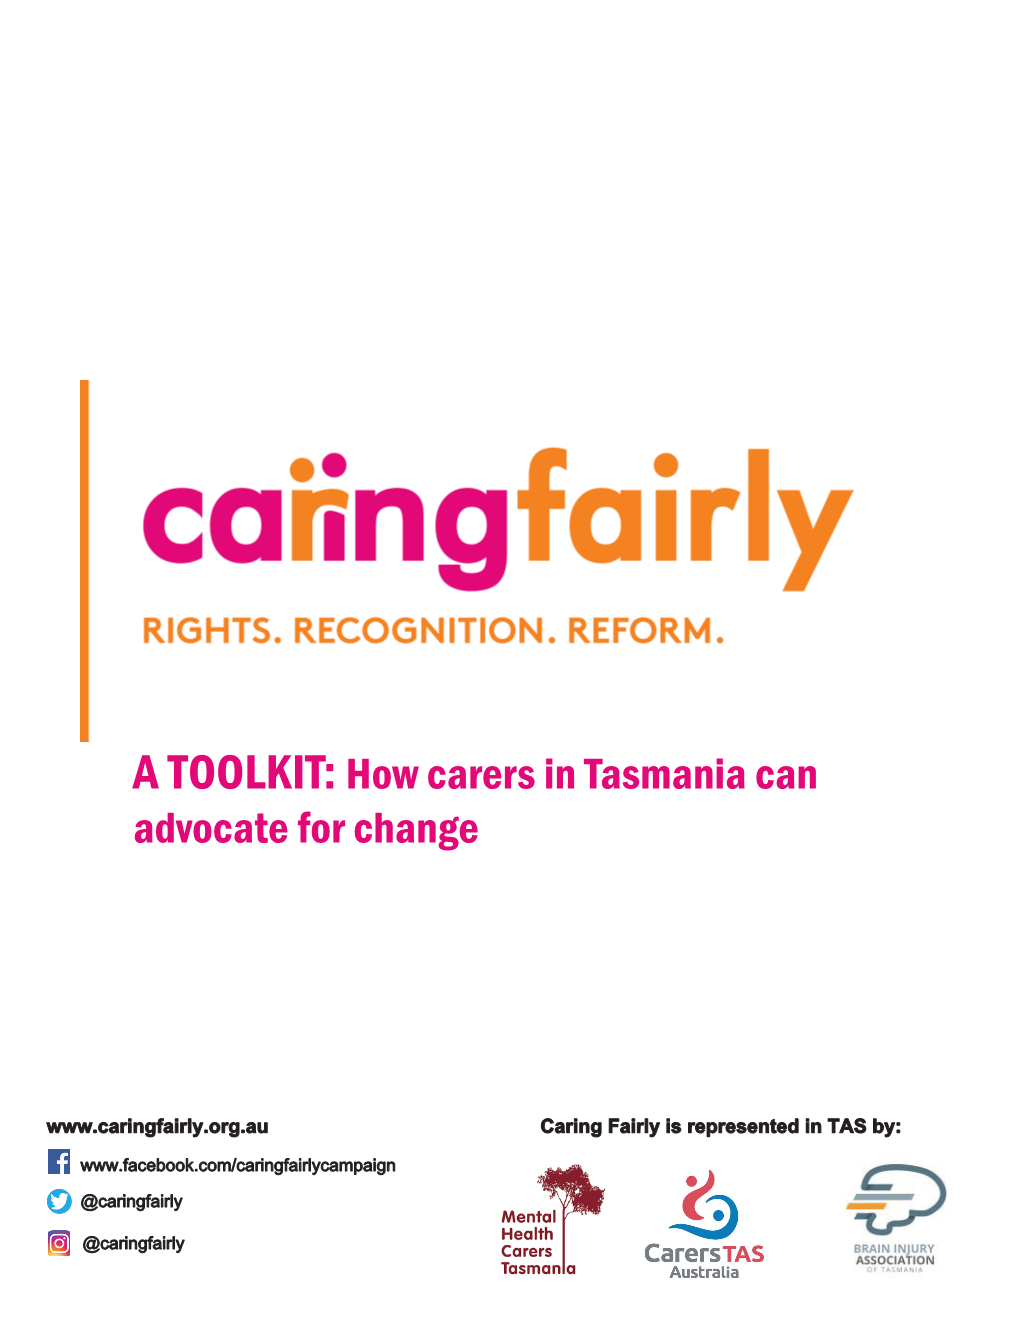 A TOOLKIT: How Carers in Tasmania Can Advocate for Change